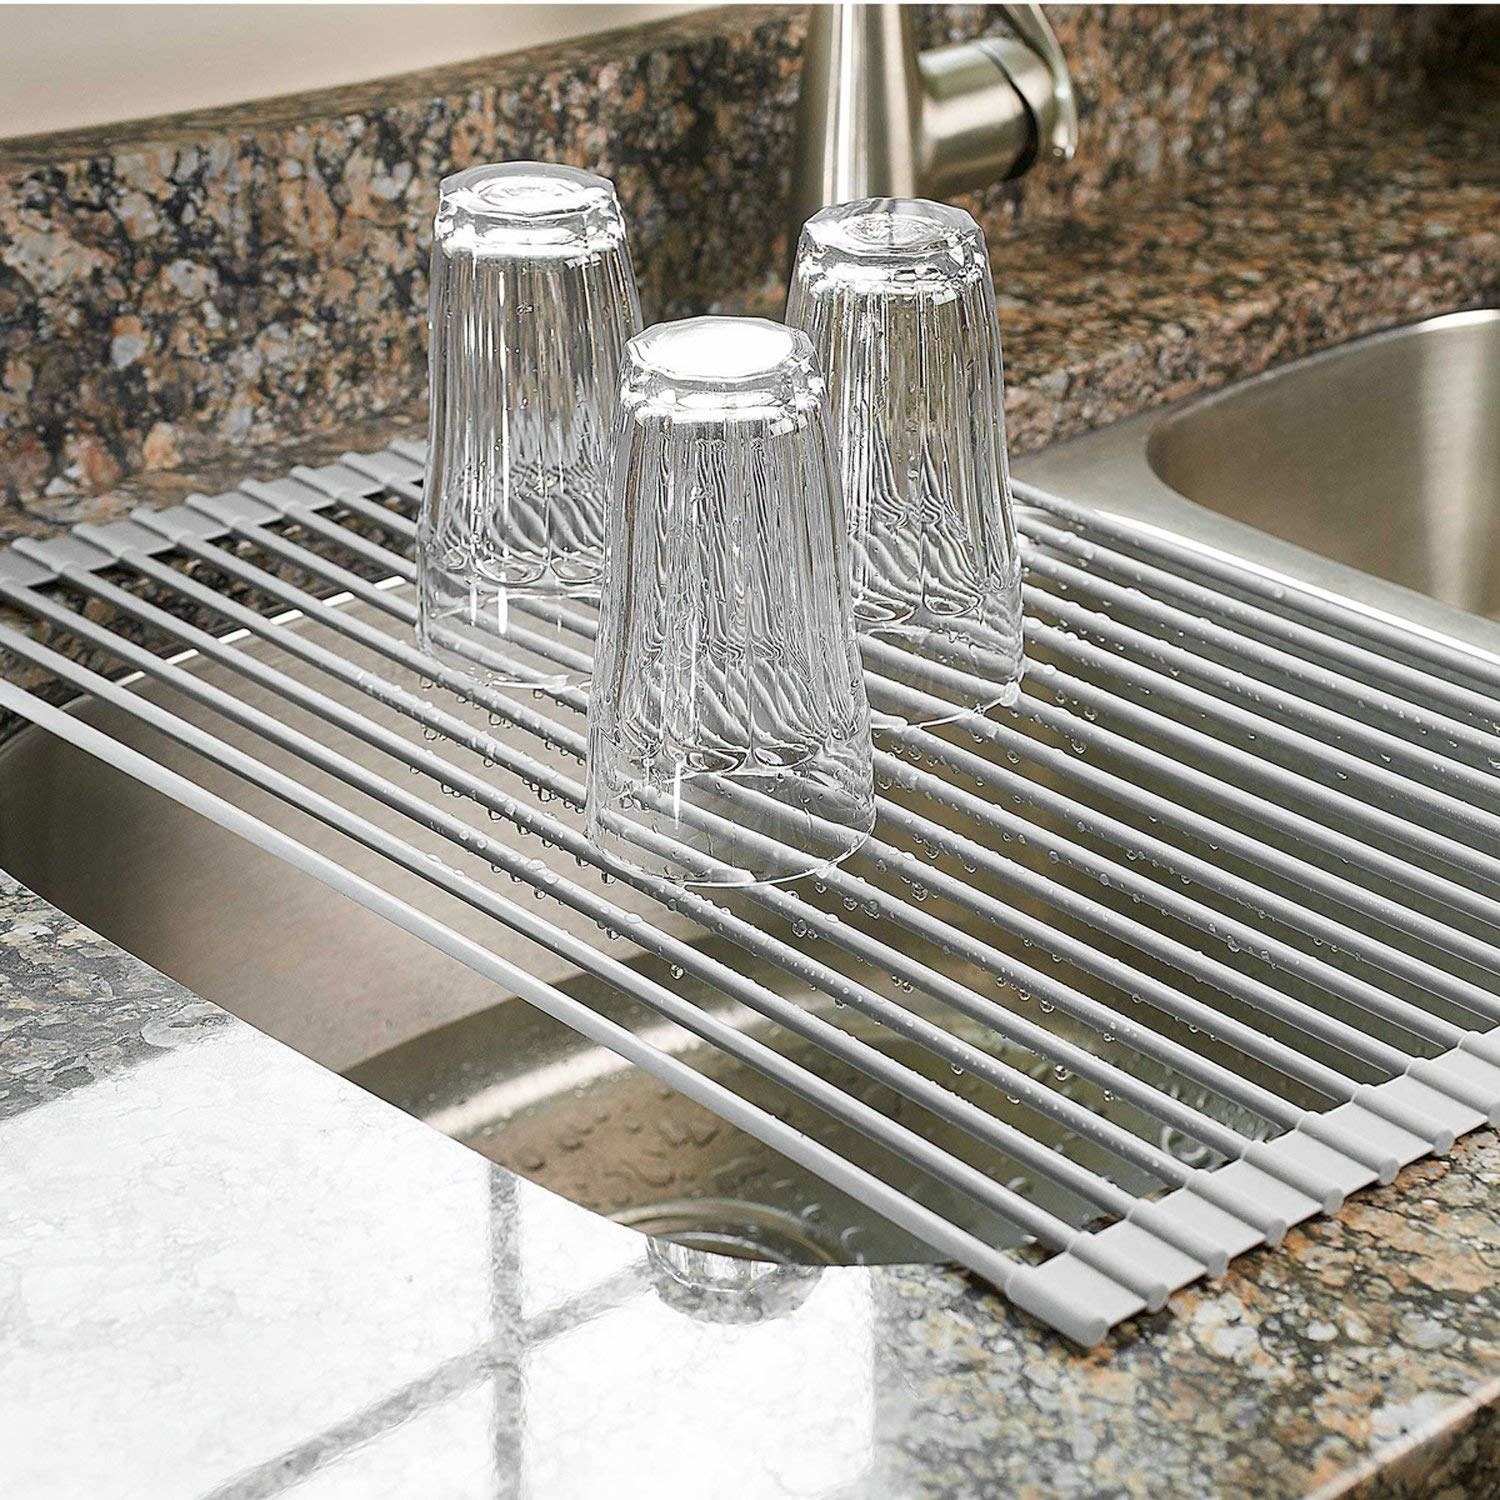 An over-the-sink drying rack with three drinking glasses on it